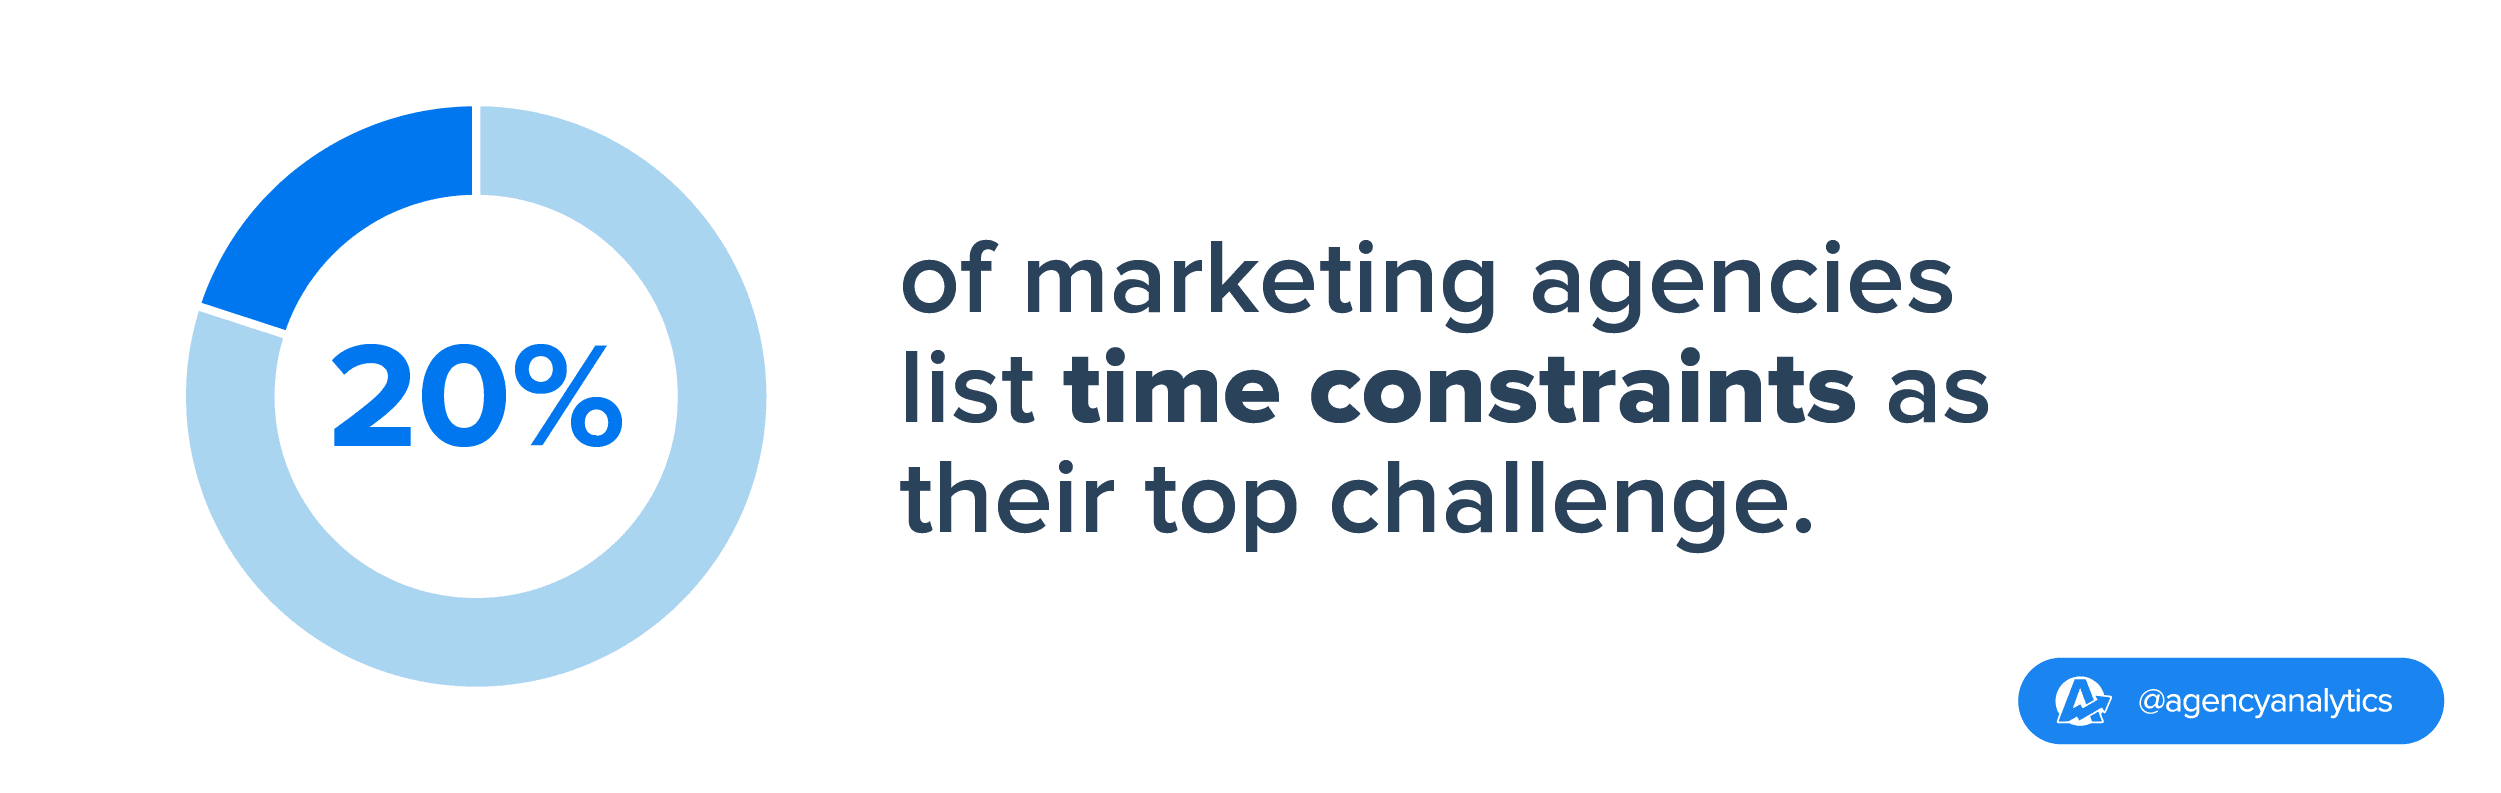 agency time contraints is a top agency challenge 